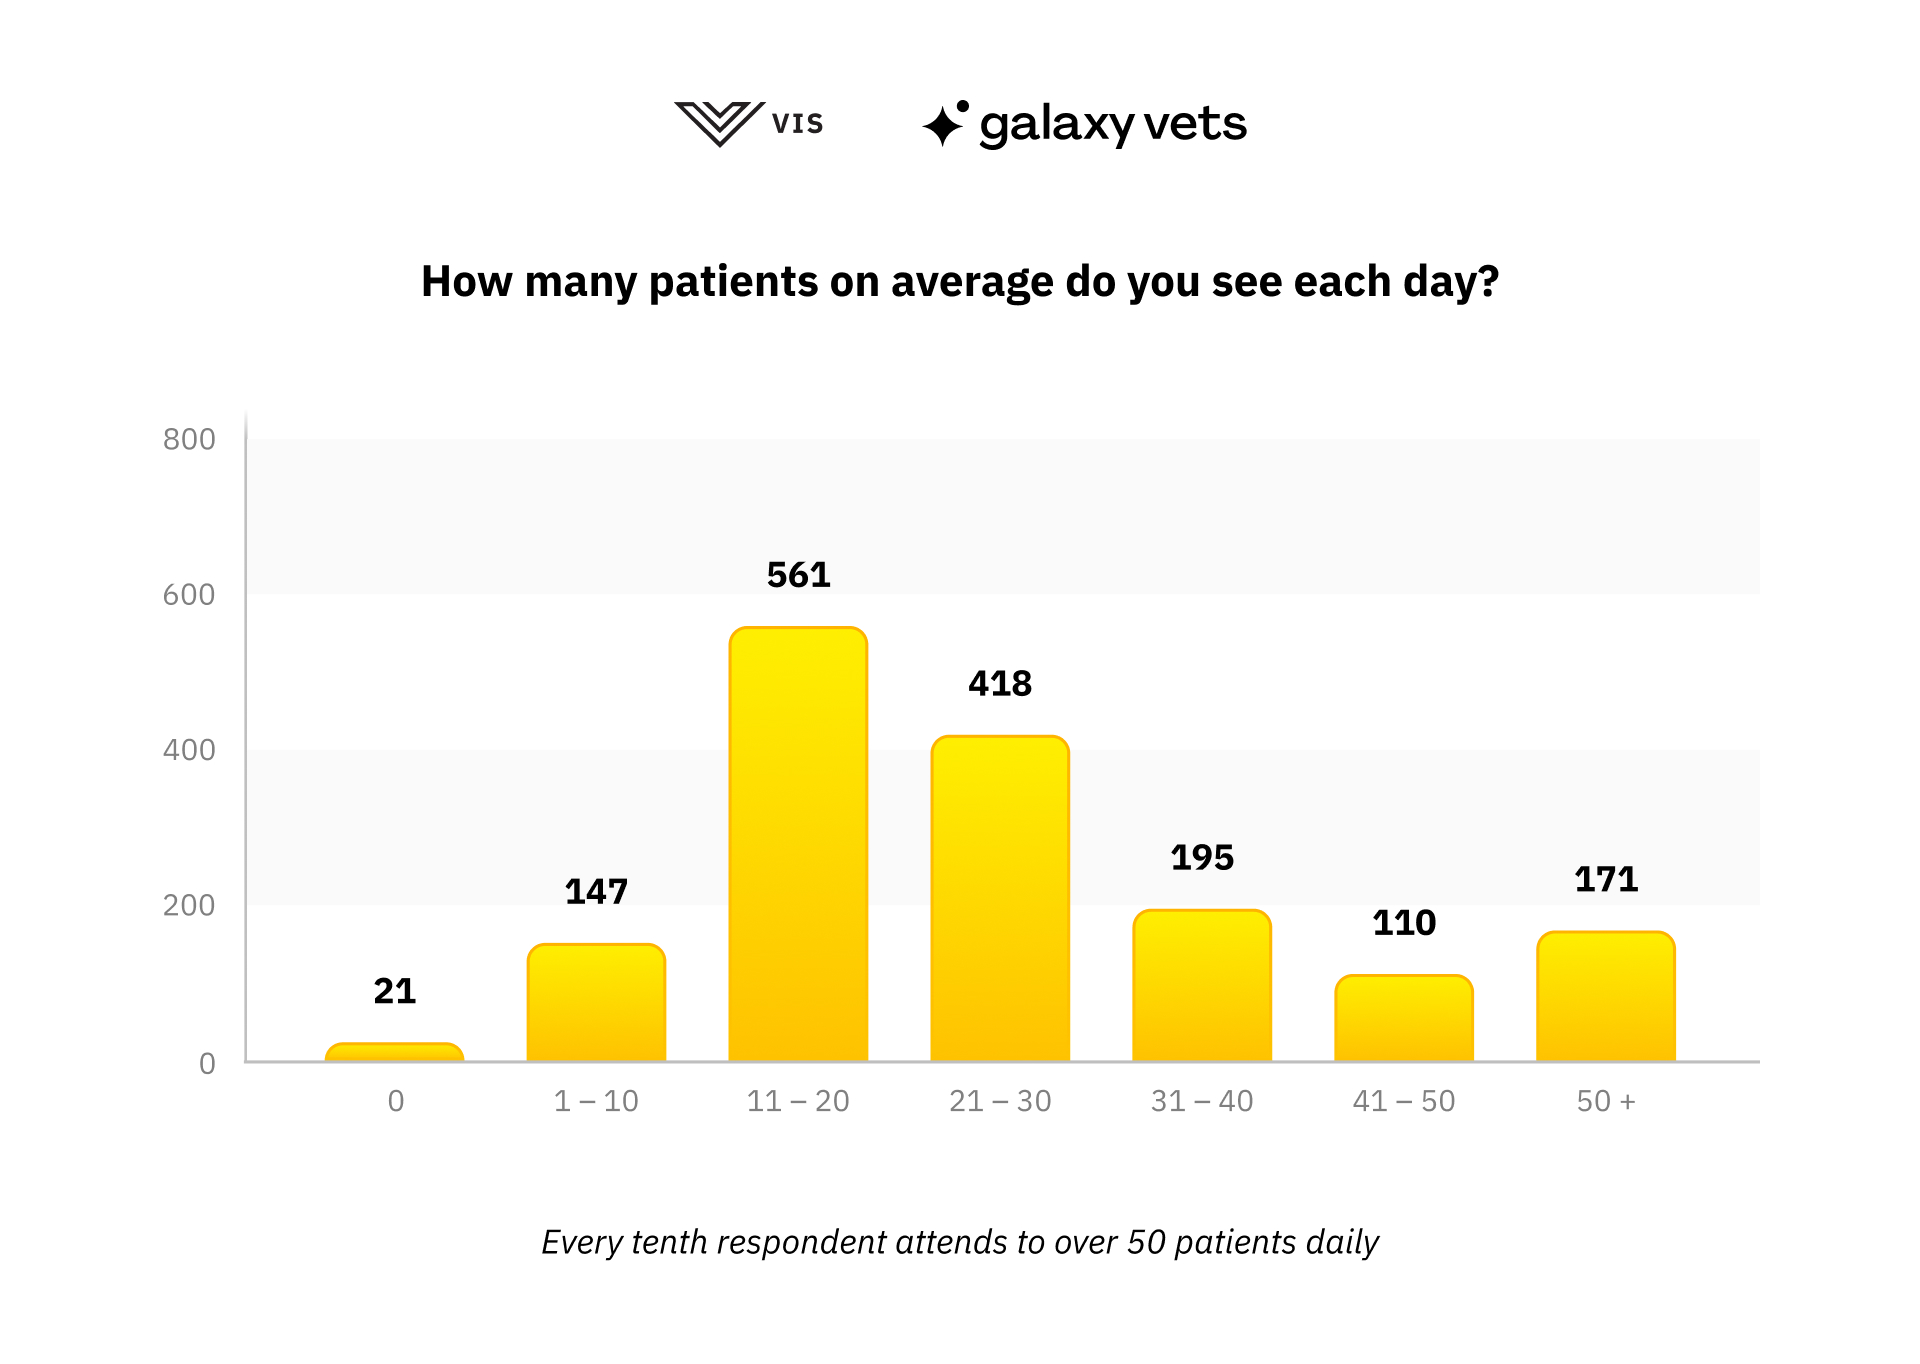 every tenth respondent attends to over 50 patients daily